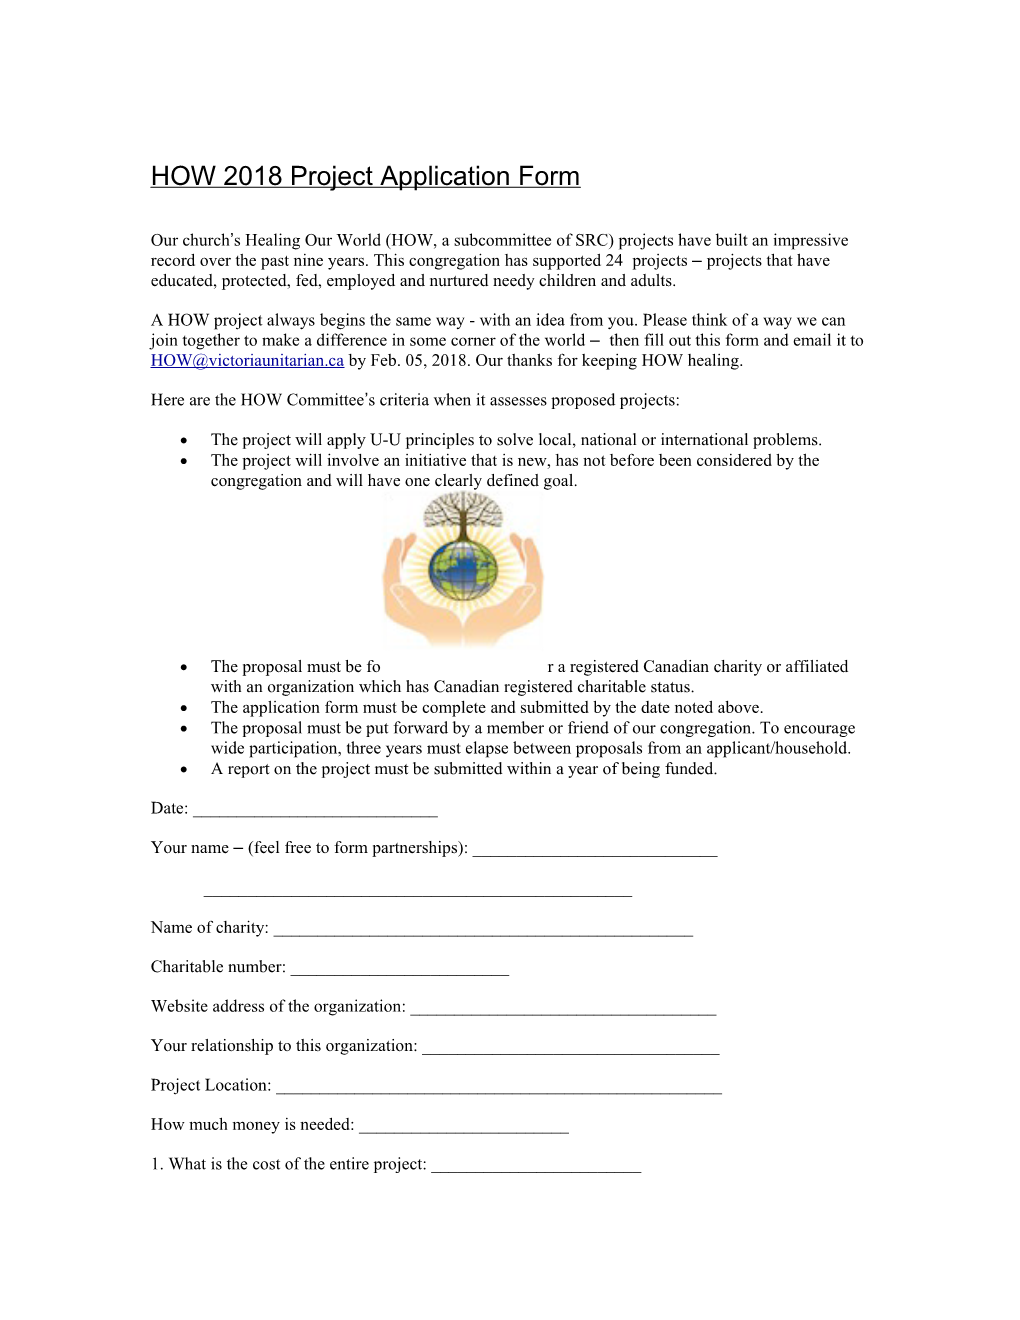 HOW 2018 Project Application Form